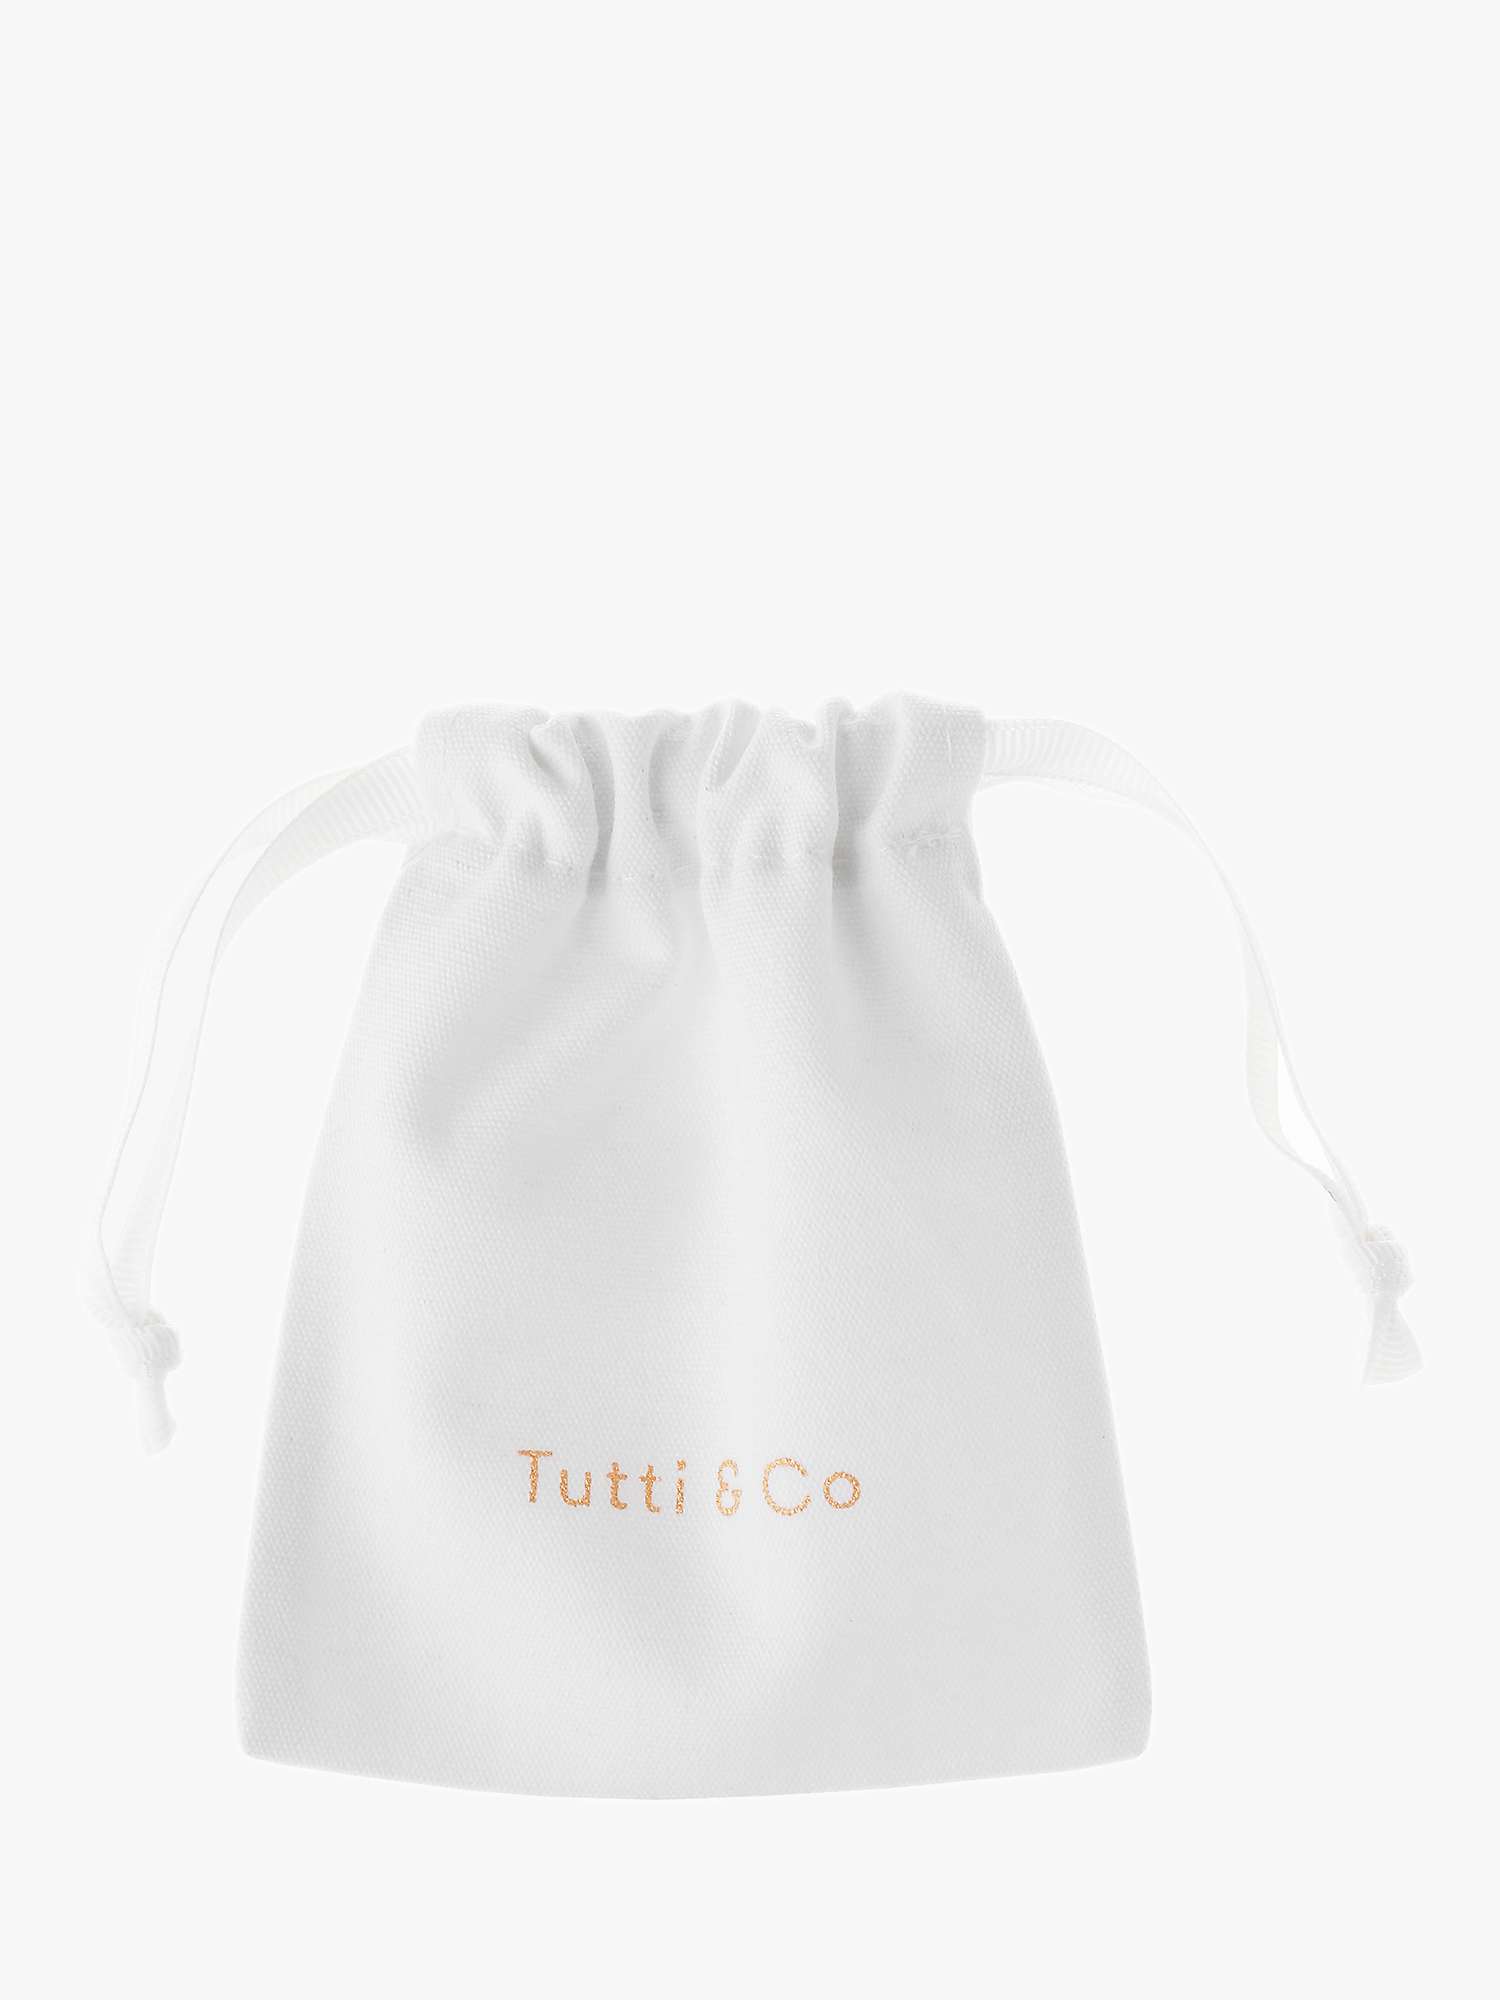 Buy Tutti & Co Seize Textured Drop Earrings Online at johnlewis.com